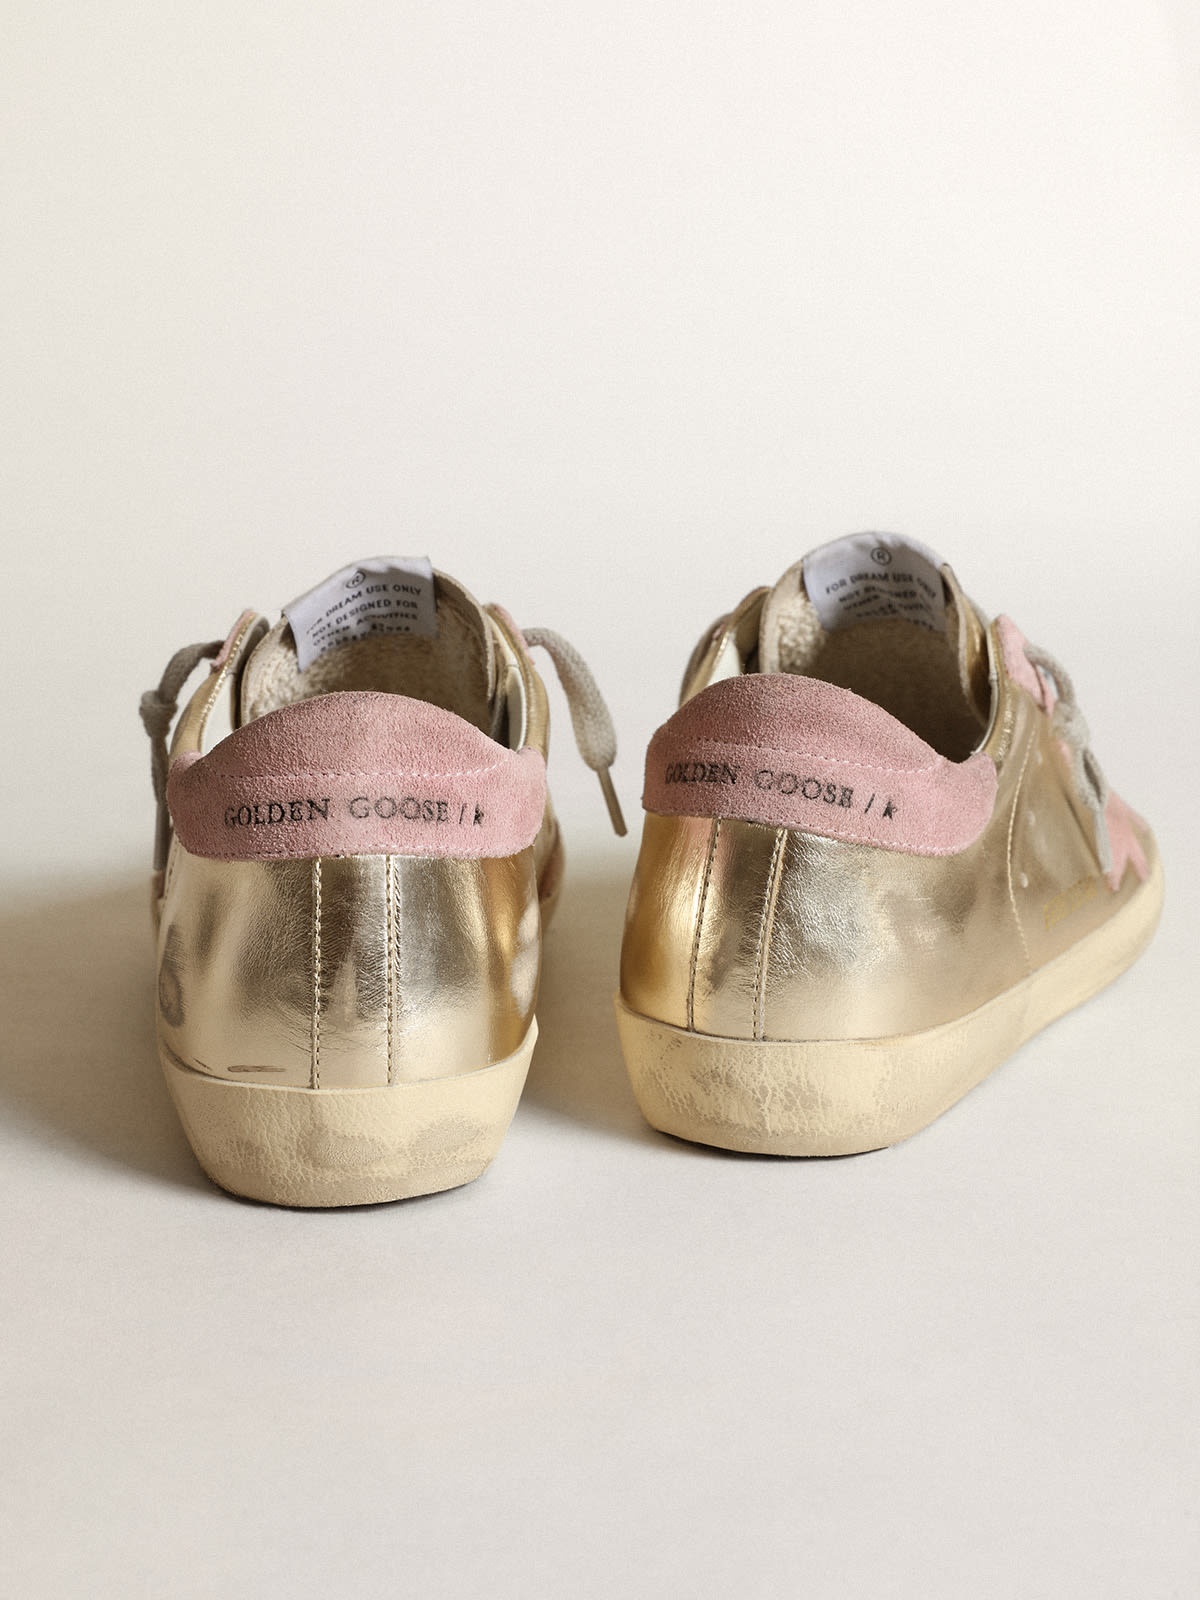 Super-Star LTD sneakers in platinum metallic leather with pink suede star and heel tab - 4